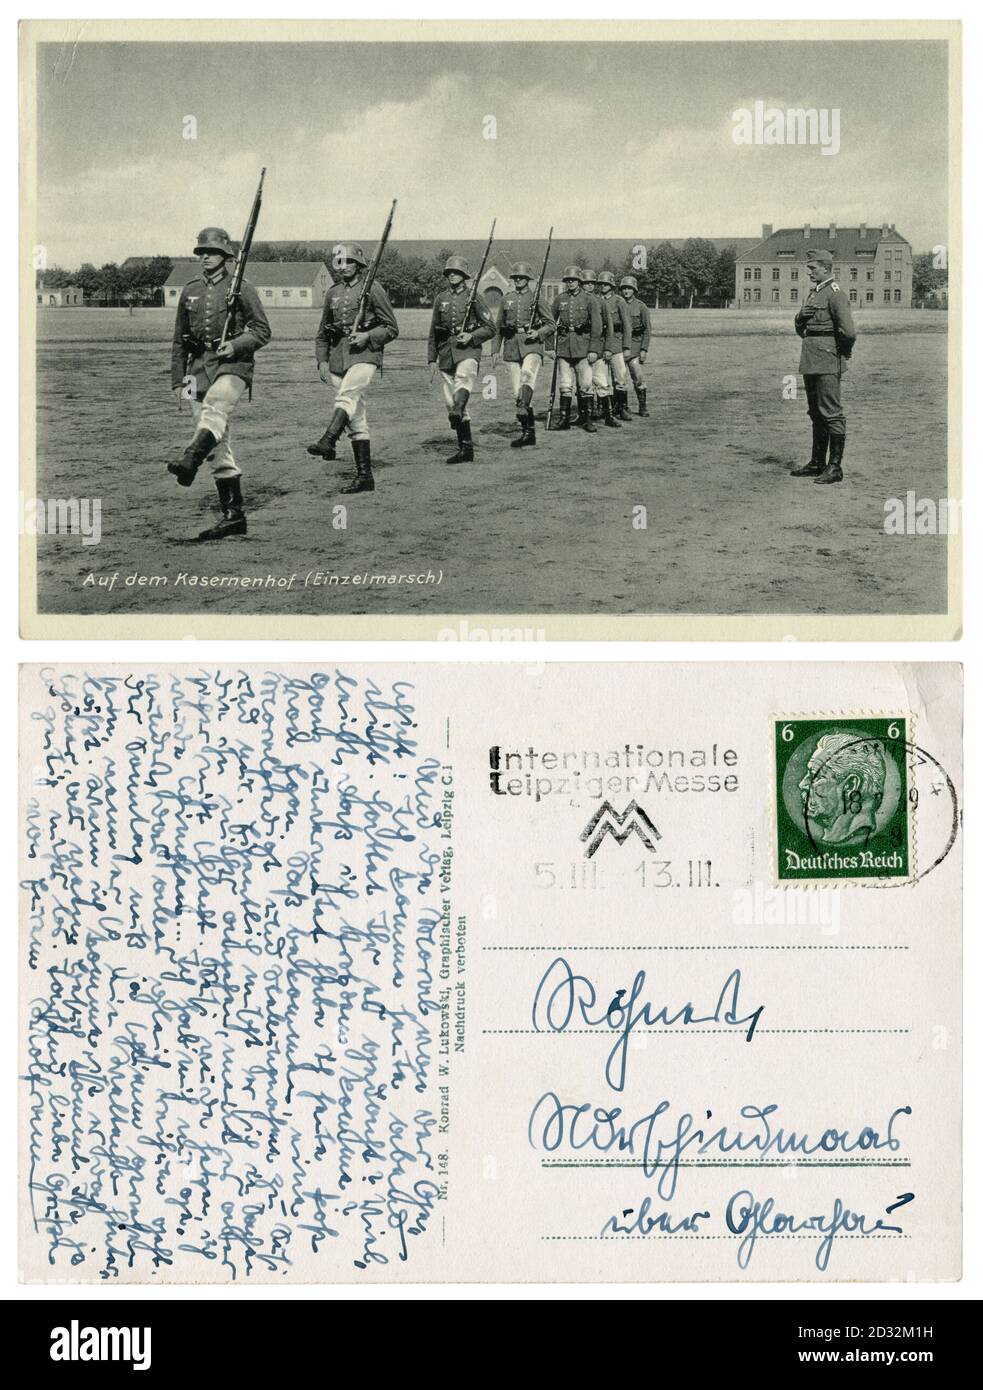 German historical photo postcard: In the barracks yard (single March). Training of soldiers in uniform with carbines, Germany, third reich, 1939 Stock Photo